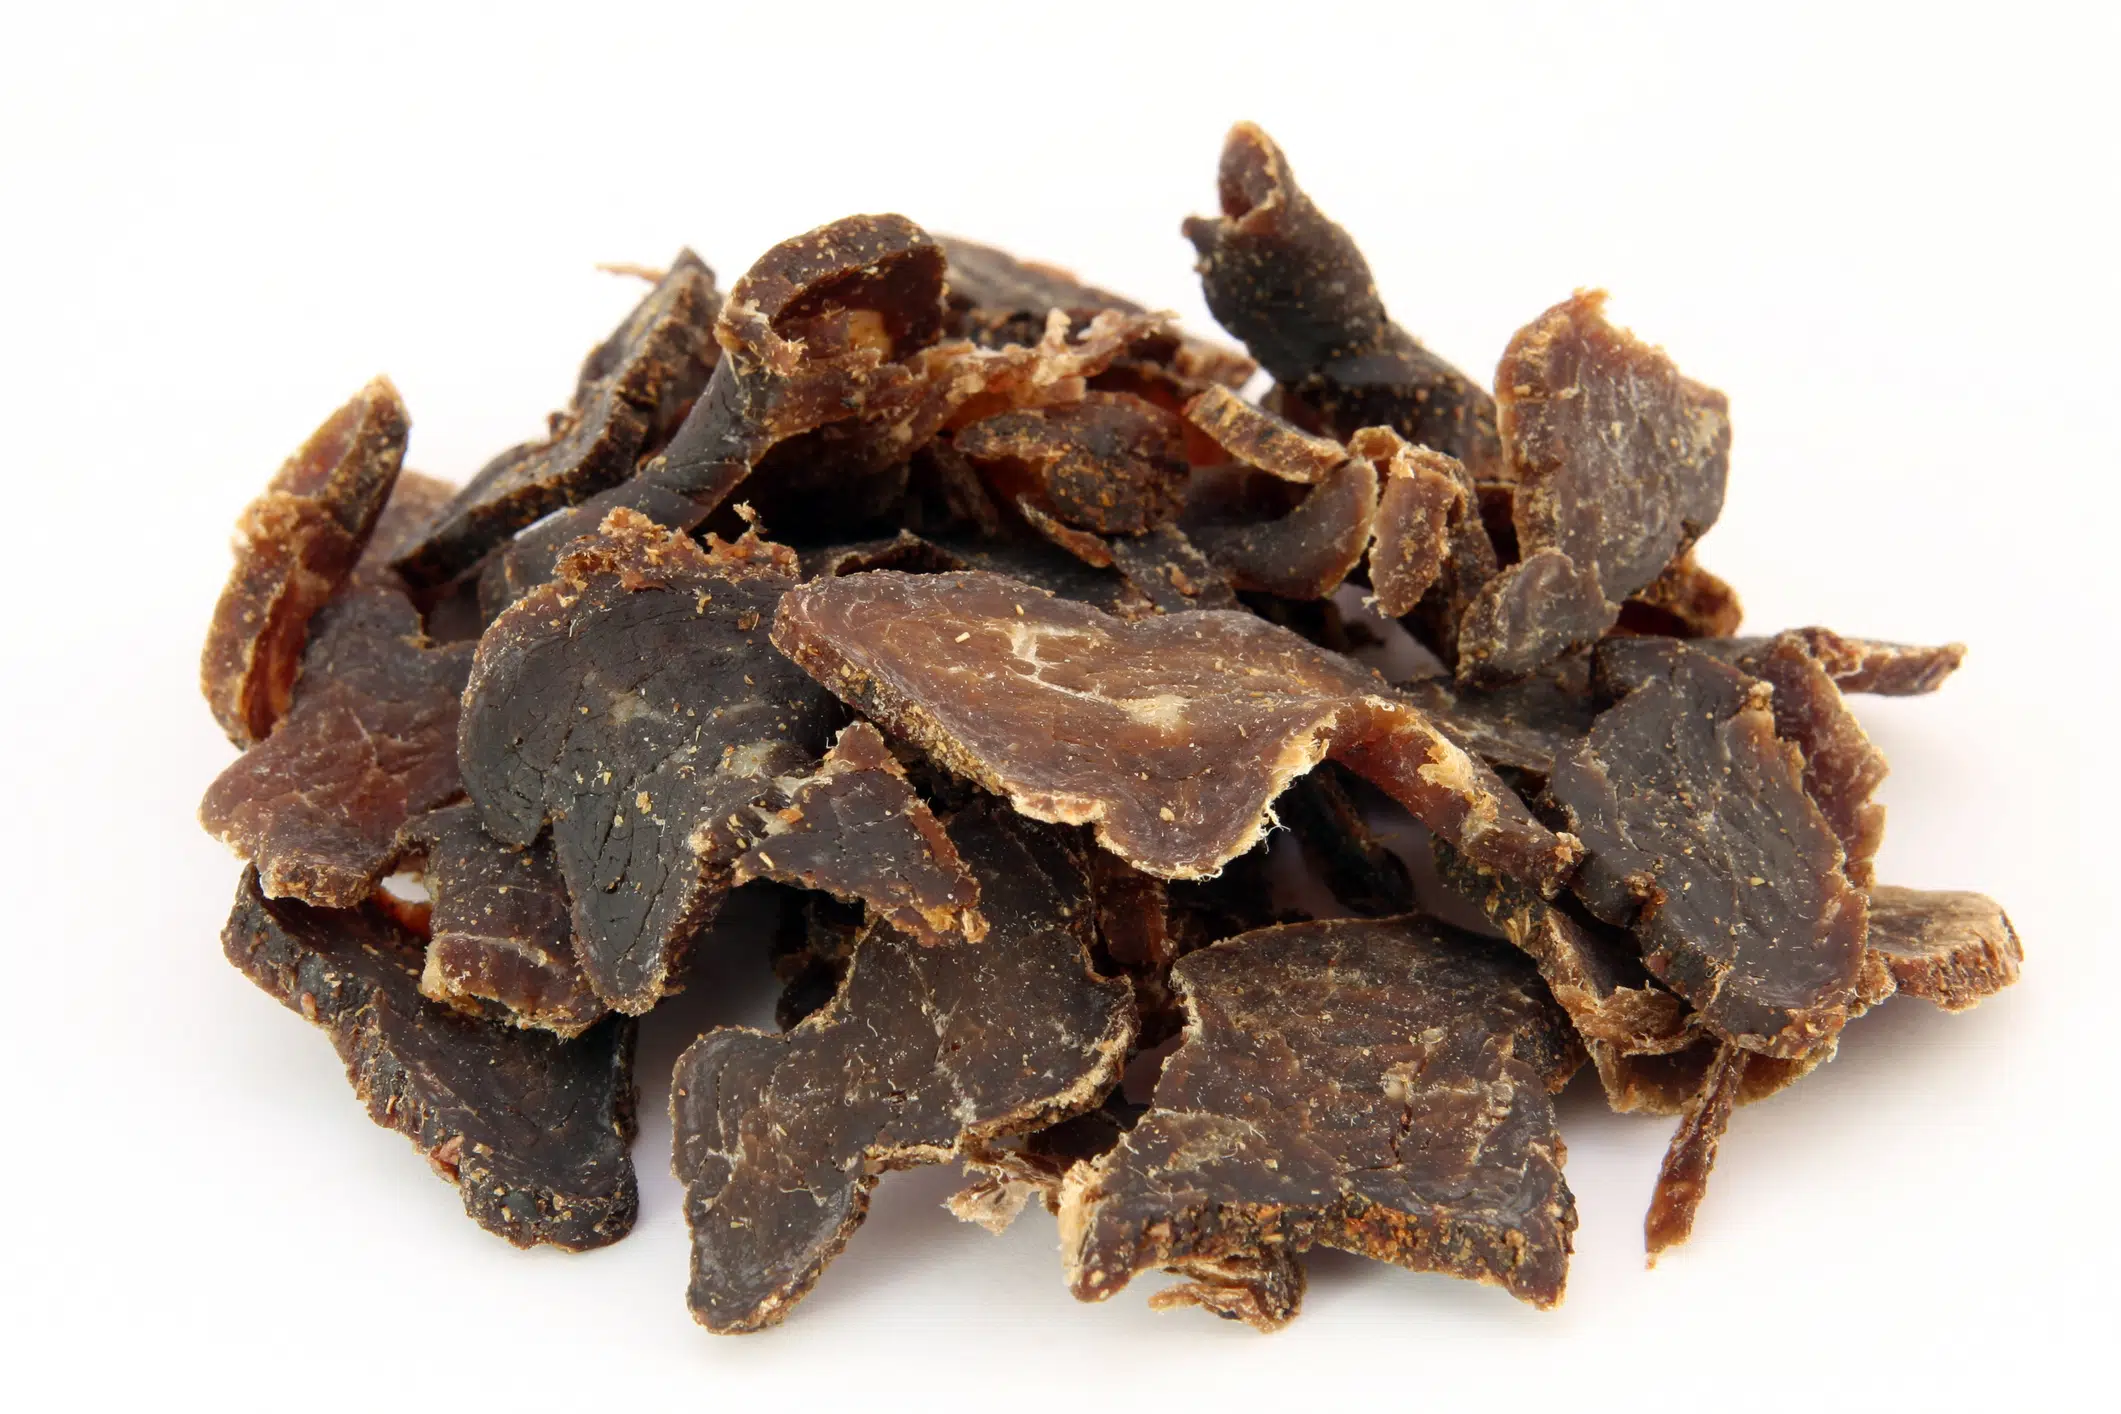 Biltong is a healthy low fat, high protein cured dry meat